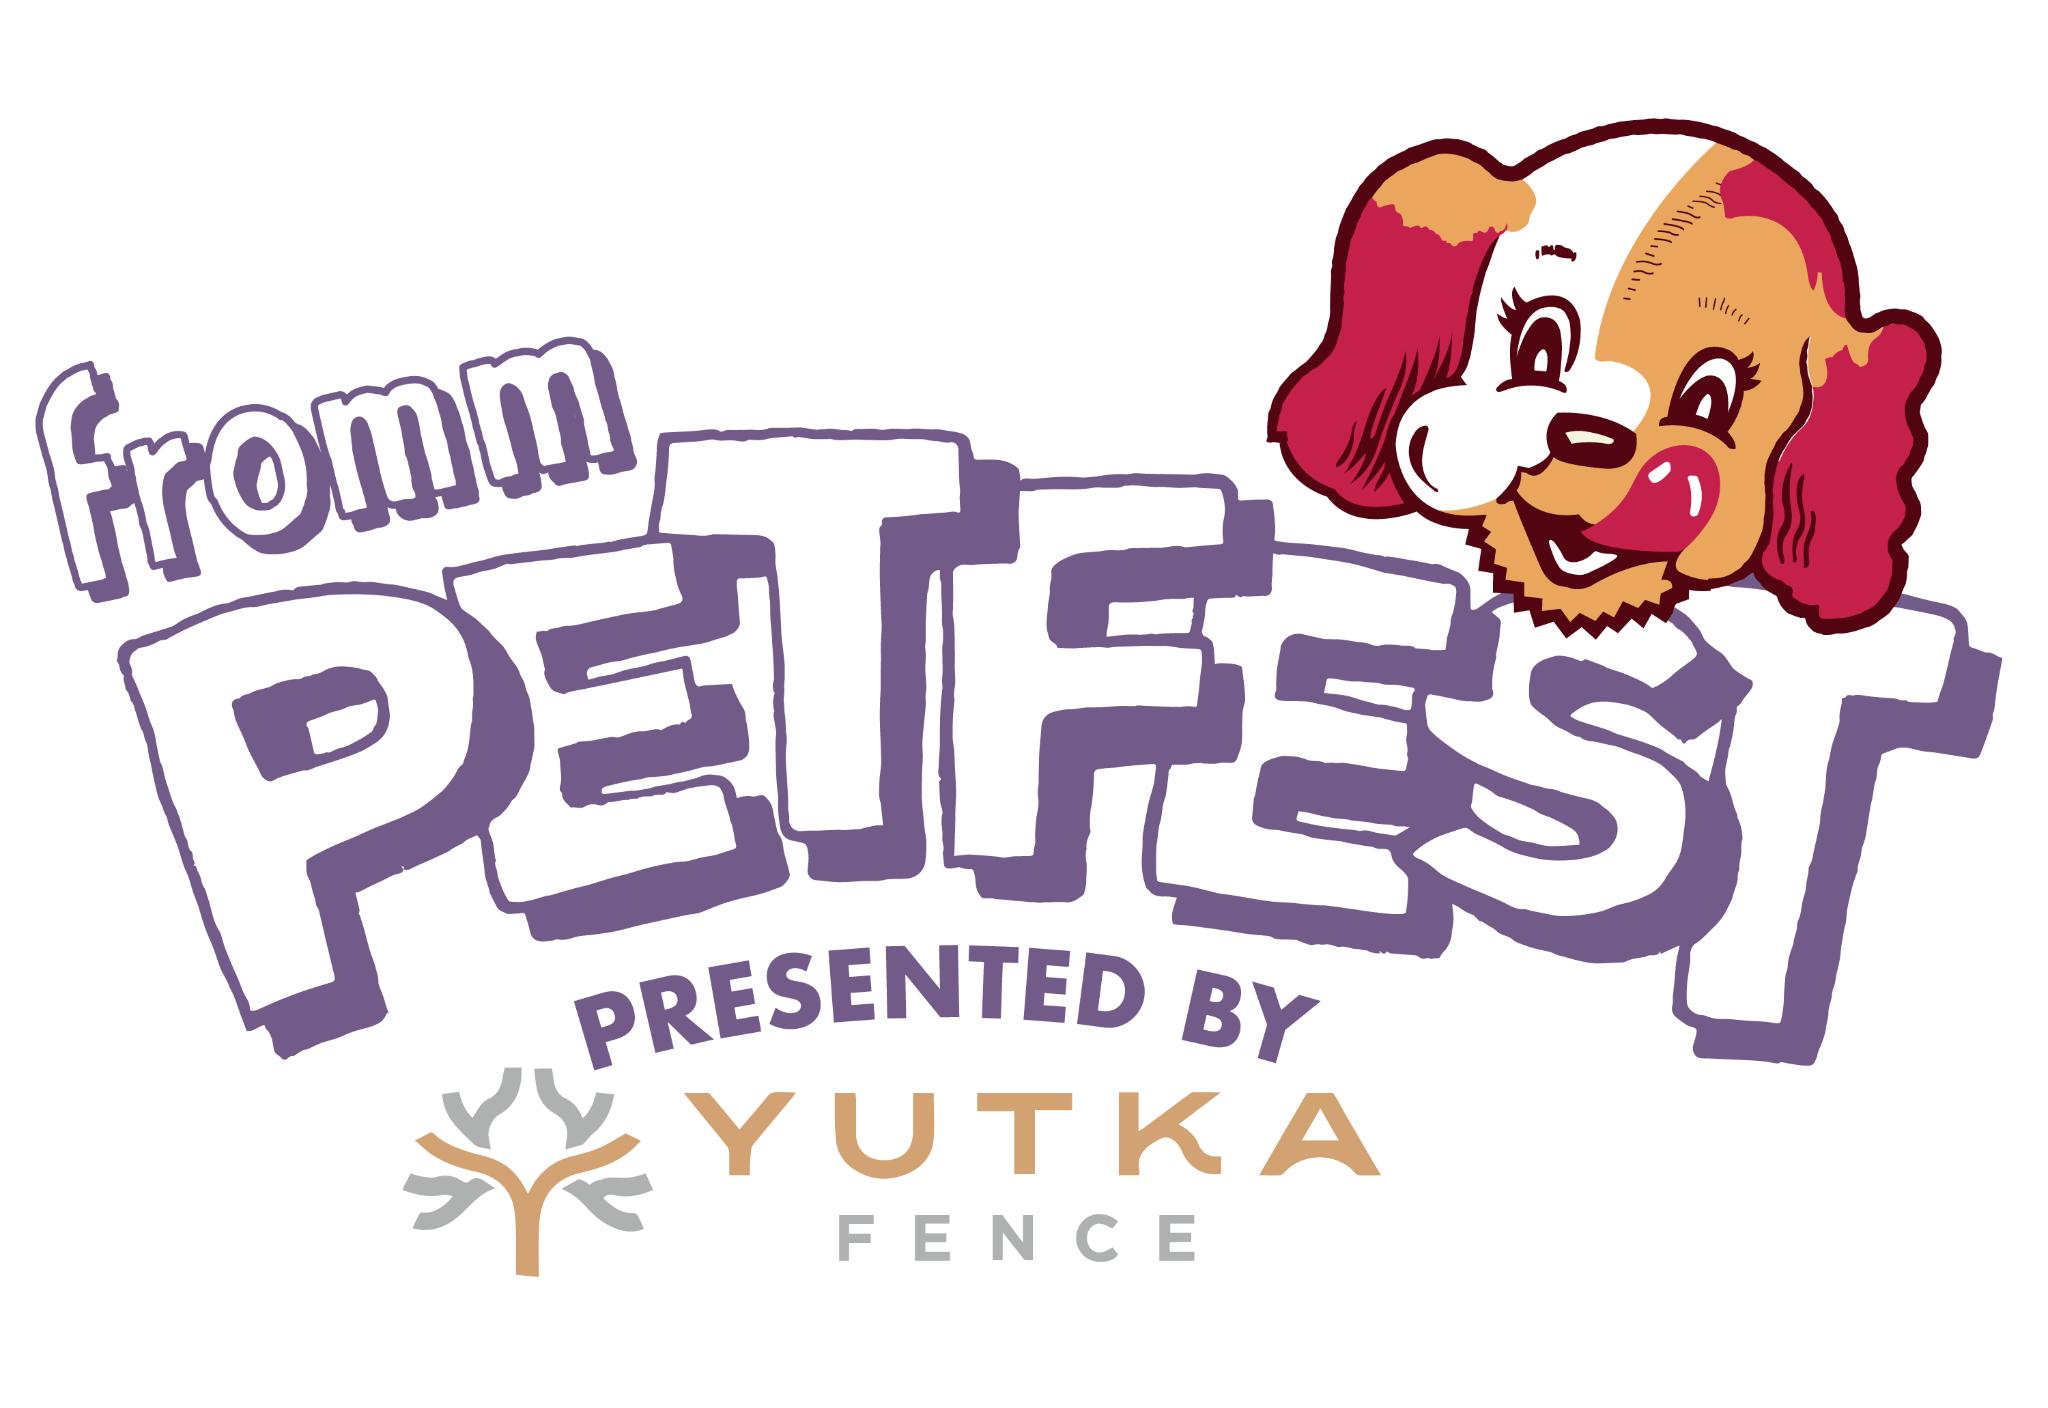 Fromm Petfest Returns to the Lakefront this Summer with New Hours of Operation